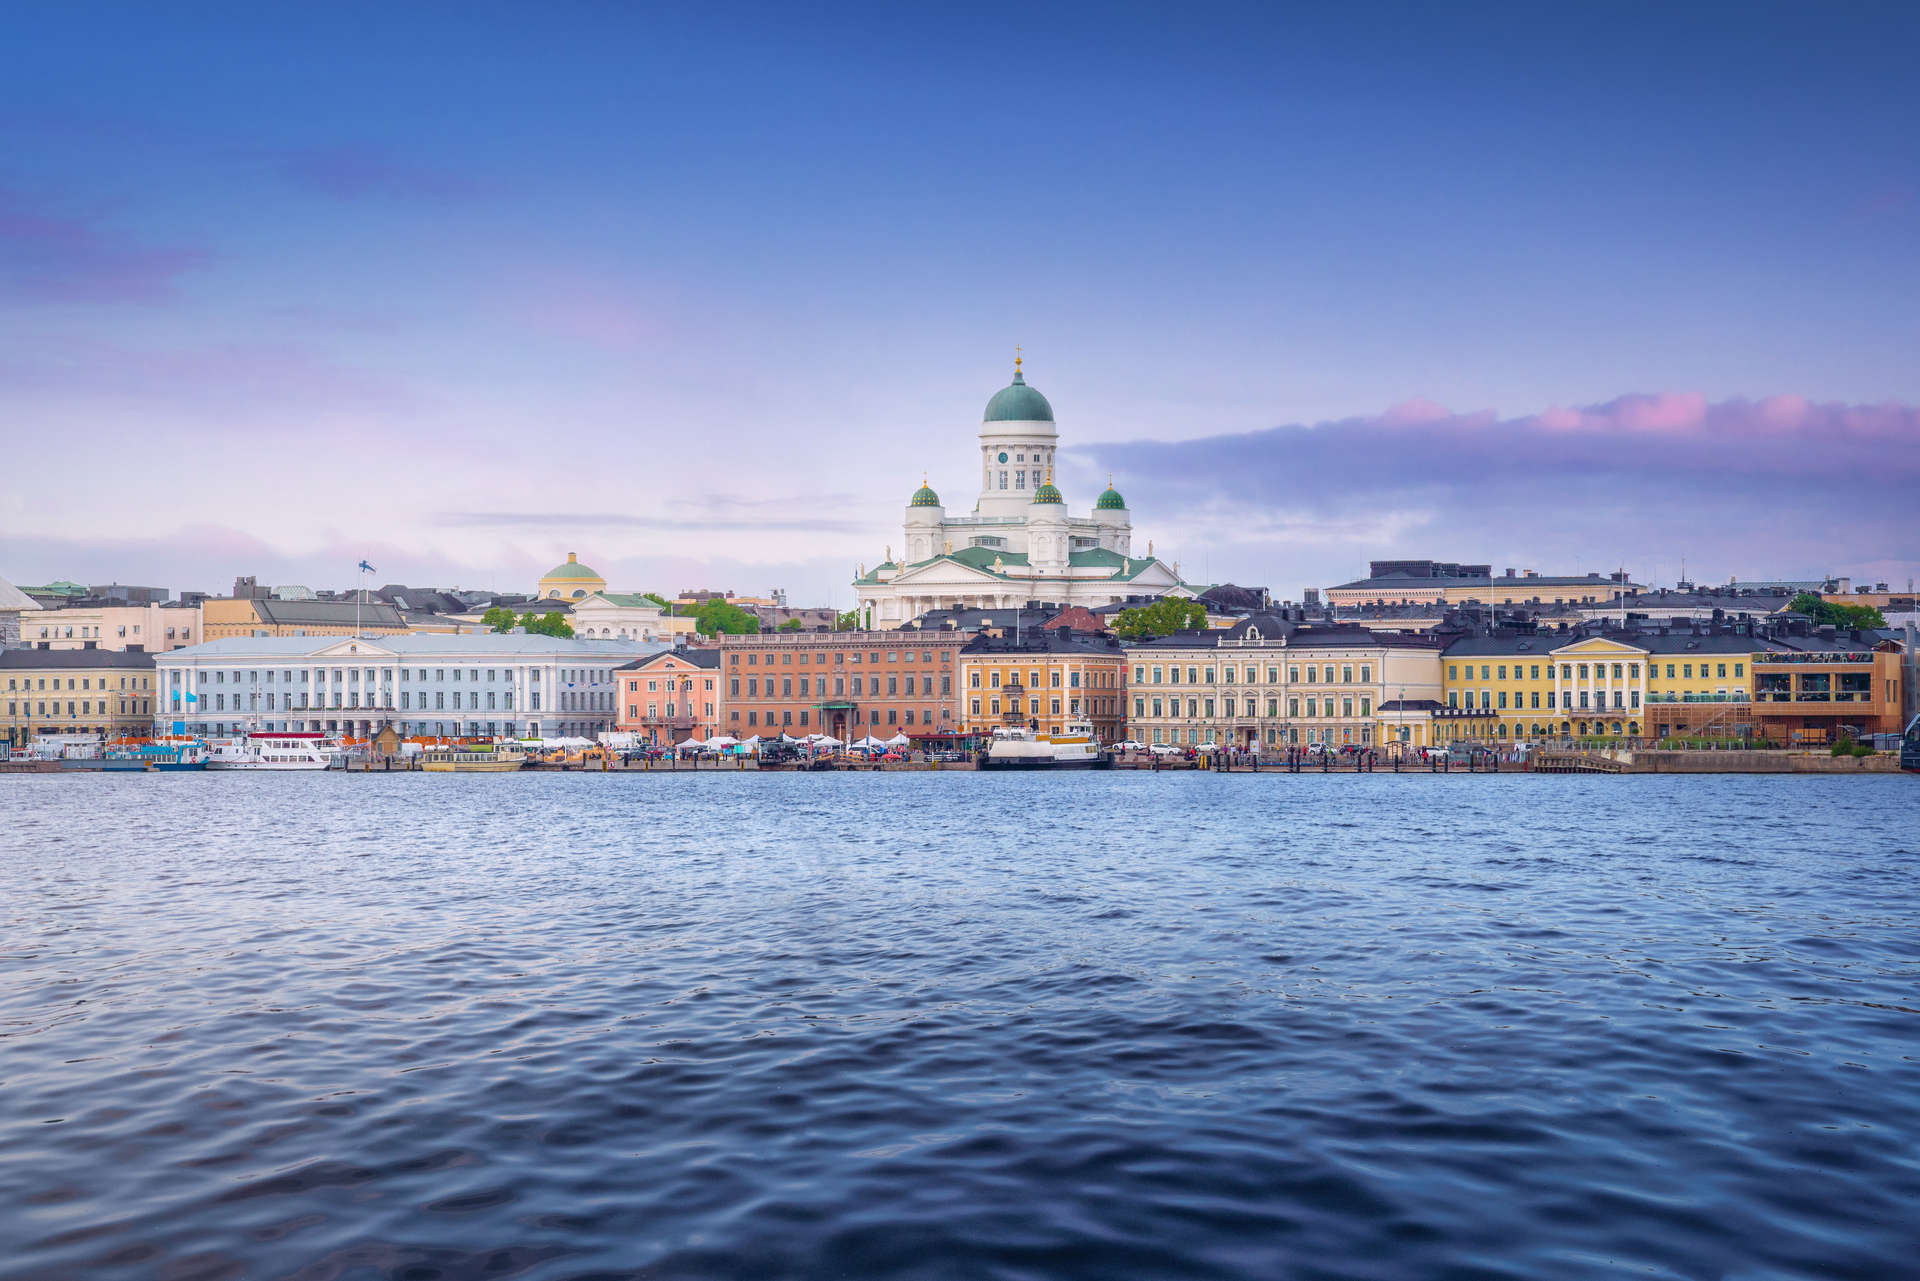 Helsinki is another charming capital city with countless architectural riches to enjoy